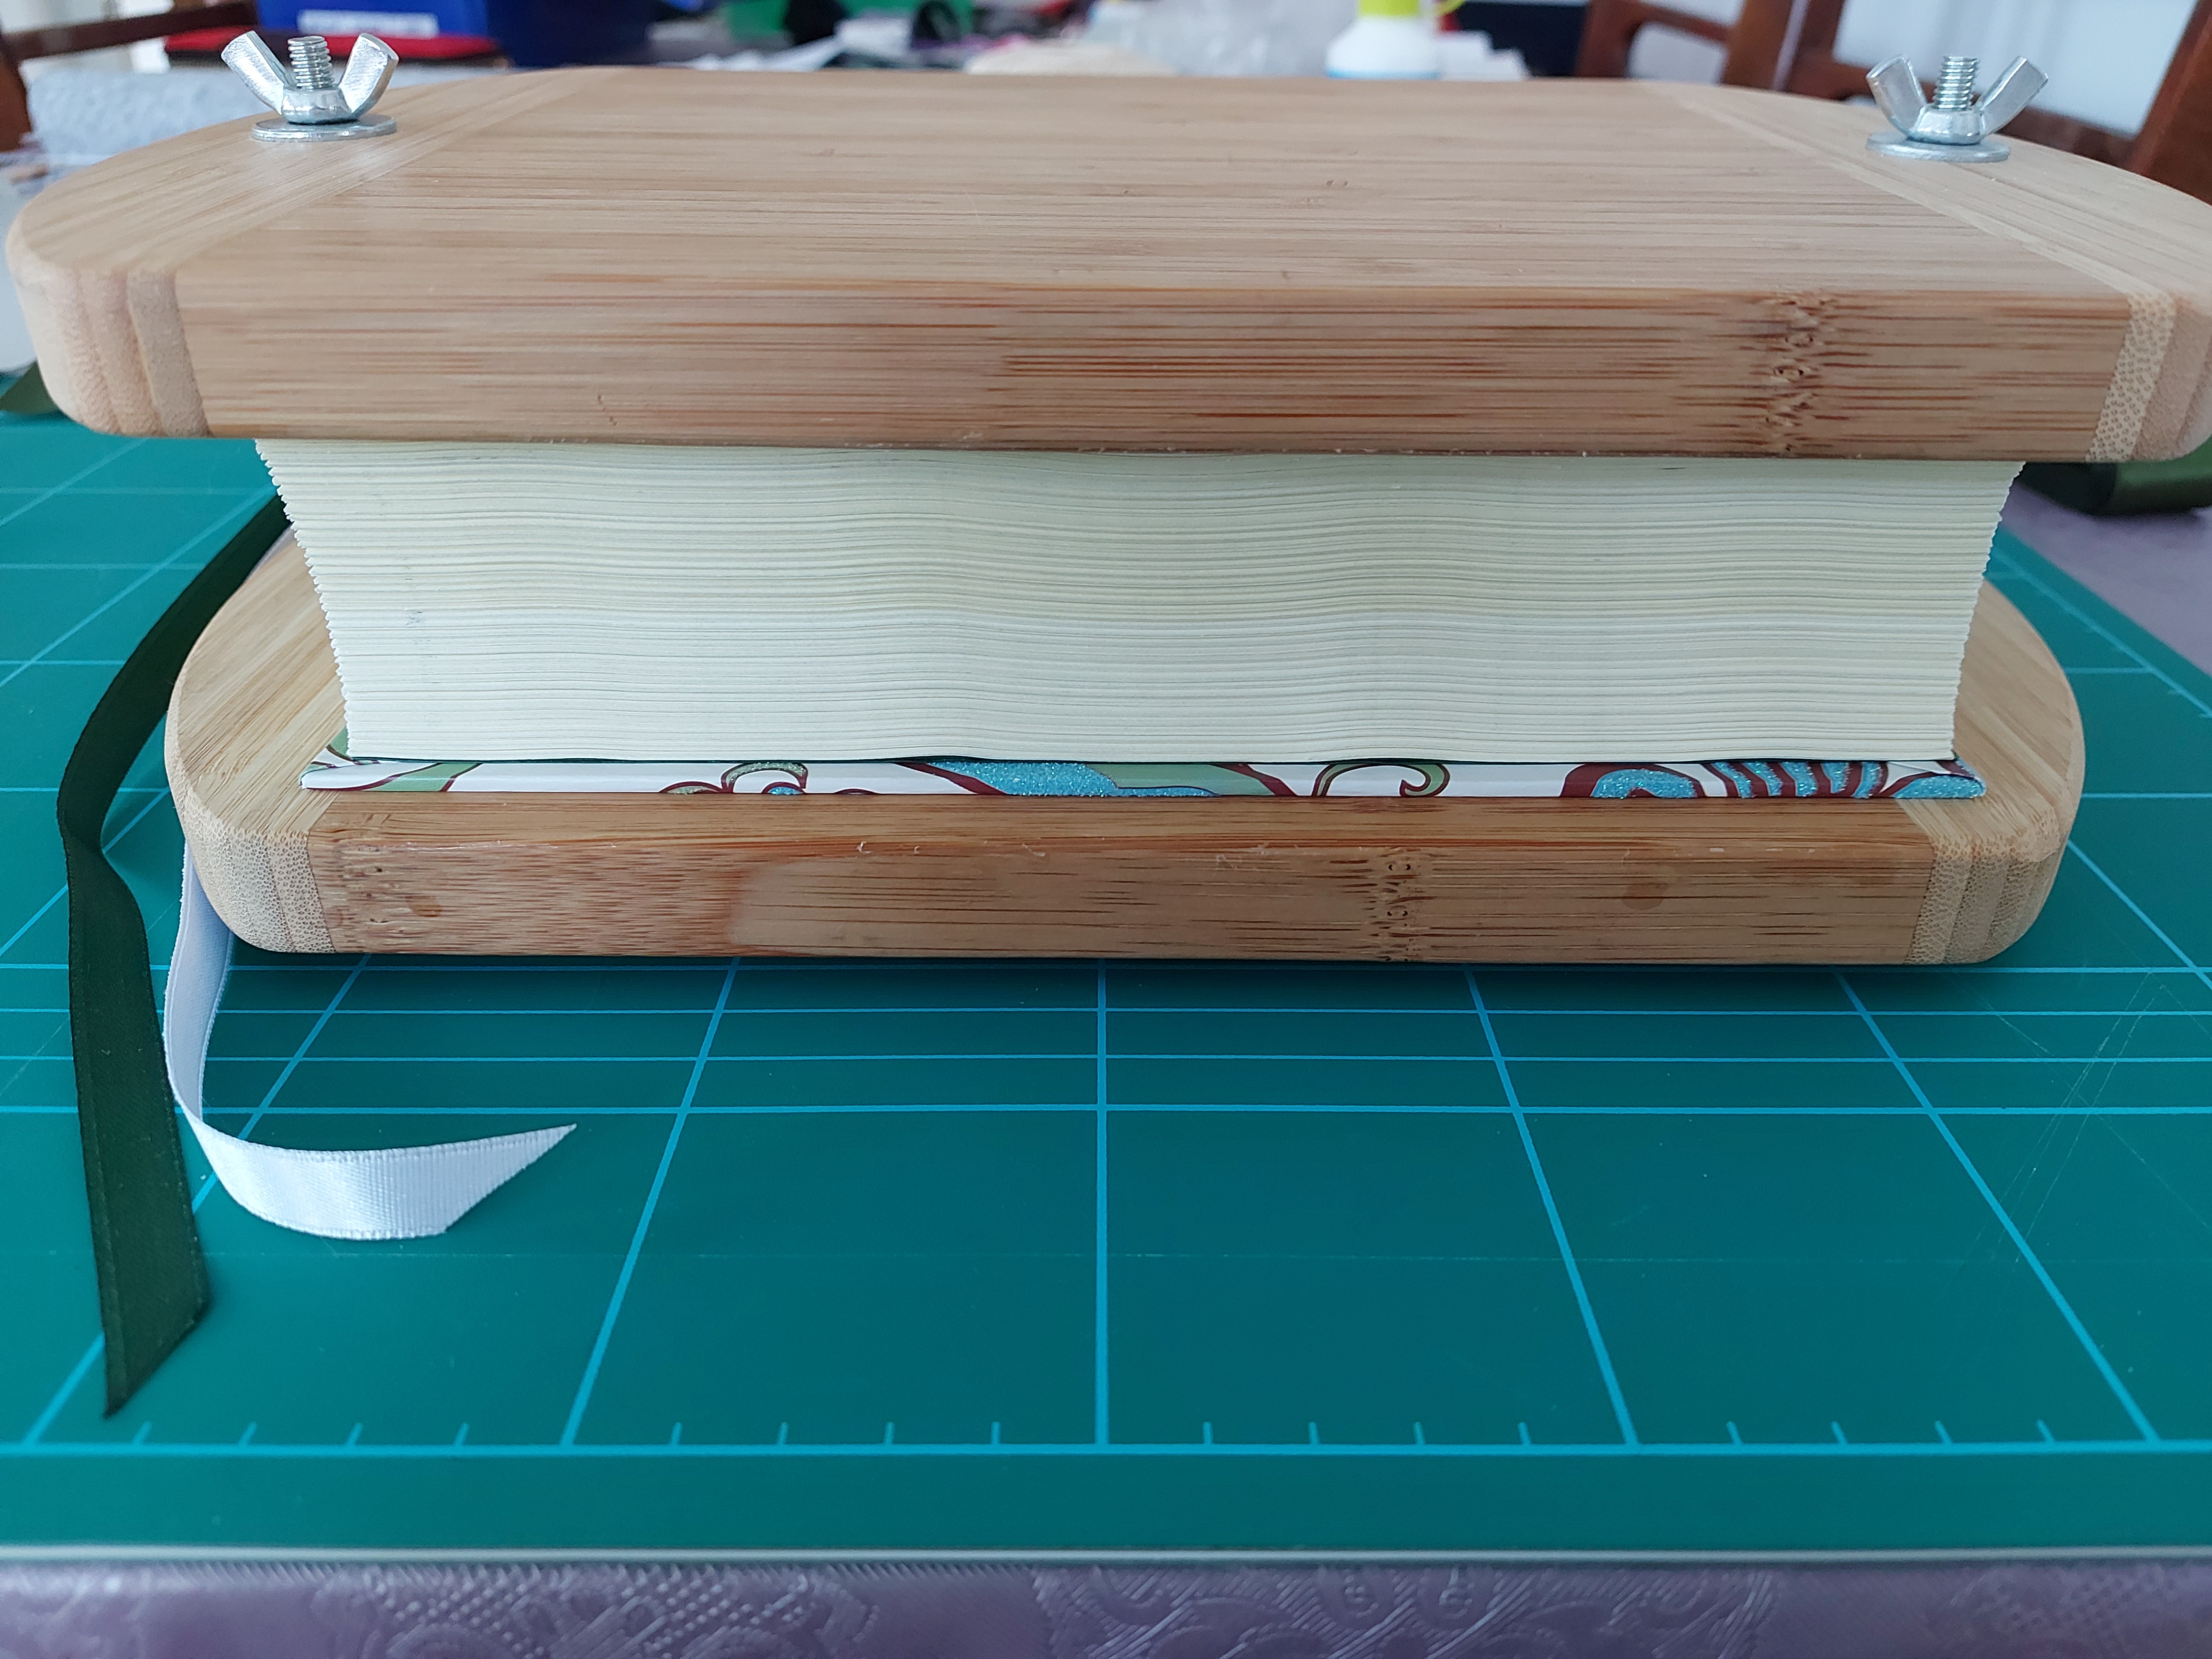 Hardcover book in a vise